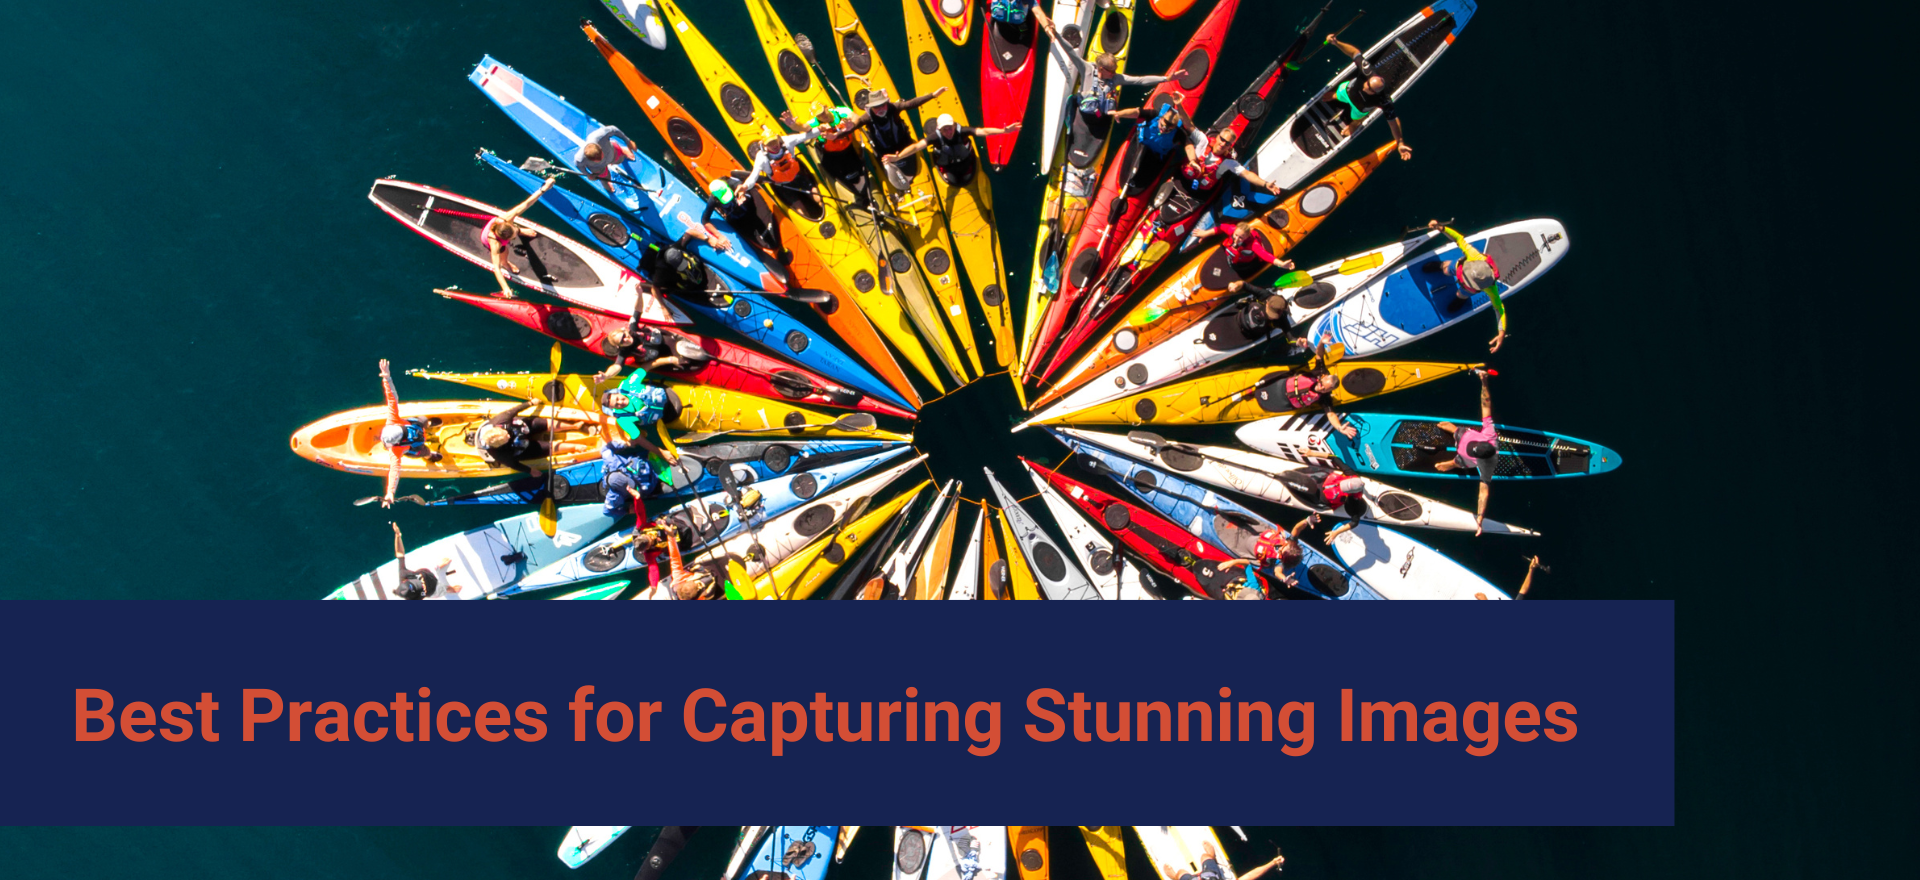 Best Practices for Capturing Stunning Images